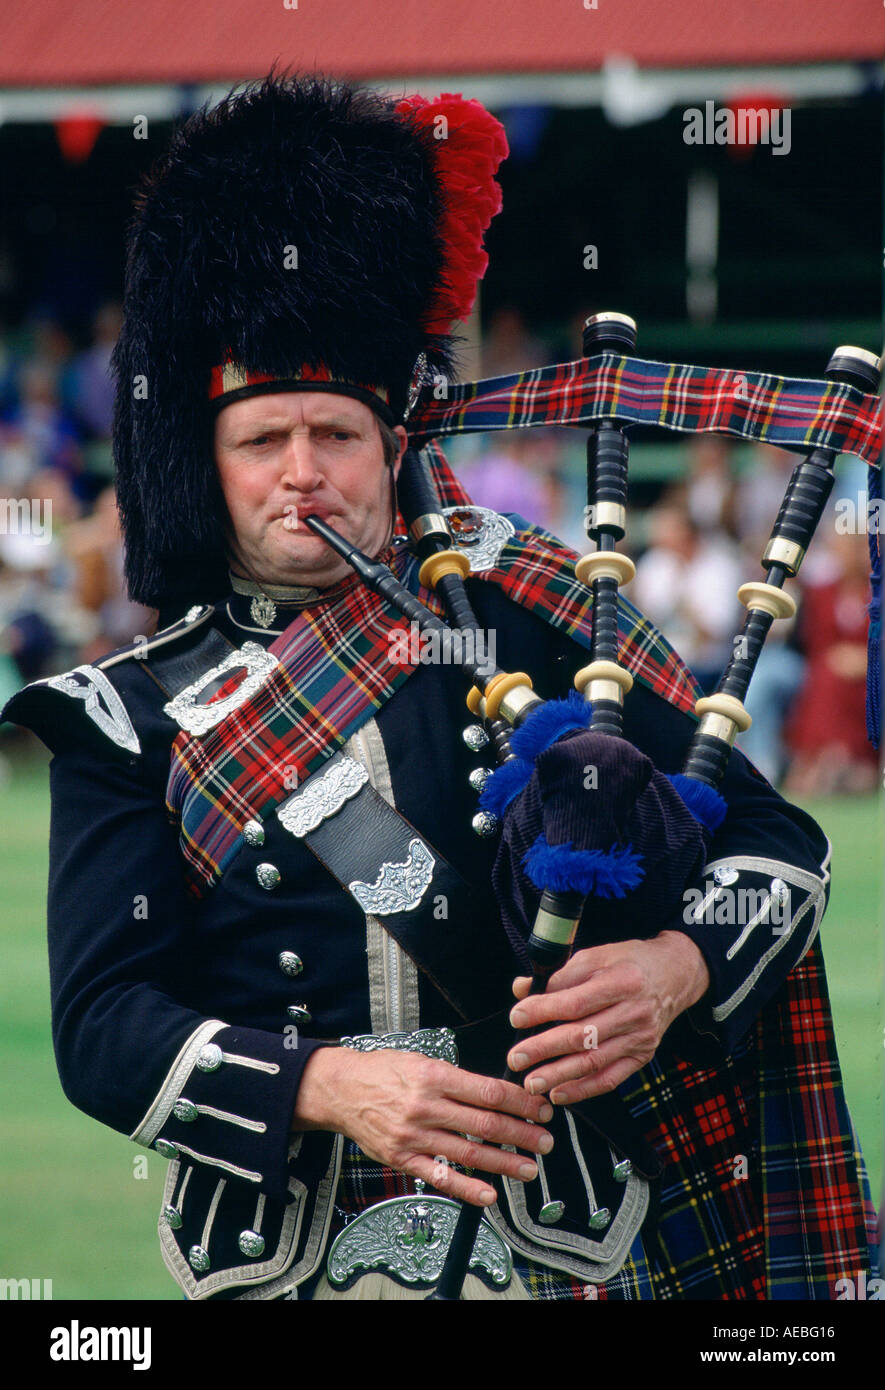 Scotsman plays Bagpipes at Braemar Games Royal Highland gathering in tartan costume and busby style hat Scotland Stock Photo